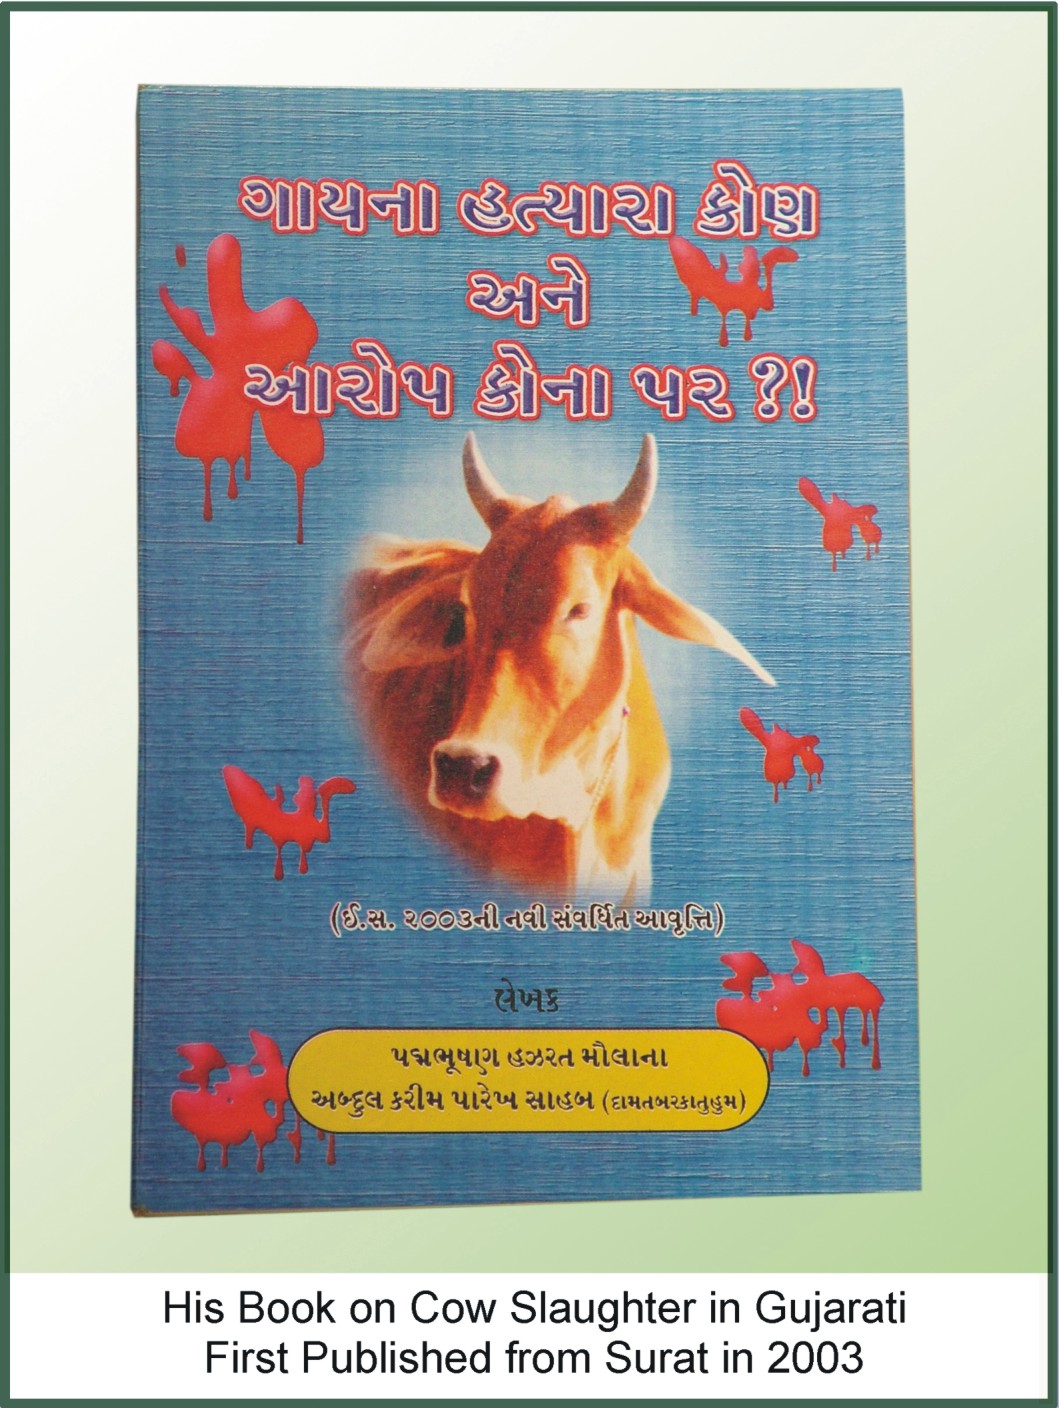 Cow Slaughter (Gujarati) First Published from Surat in 2003